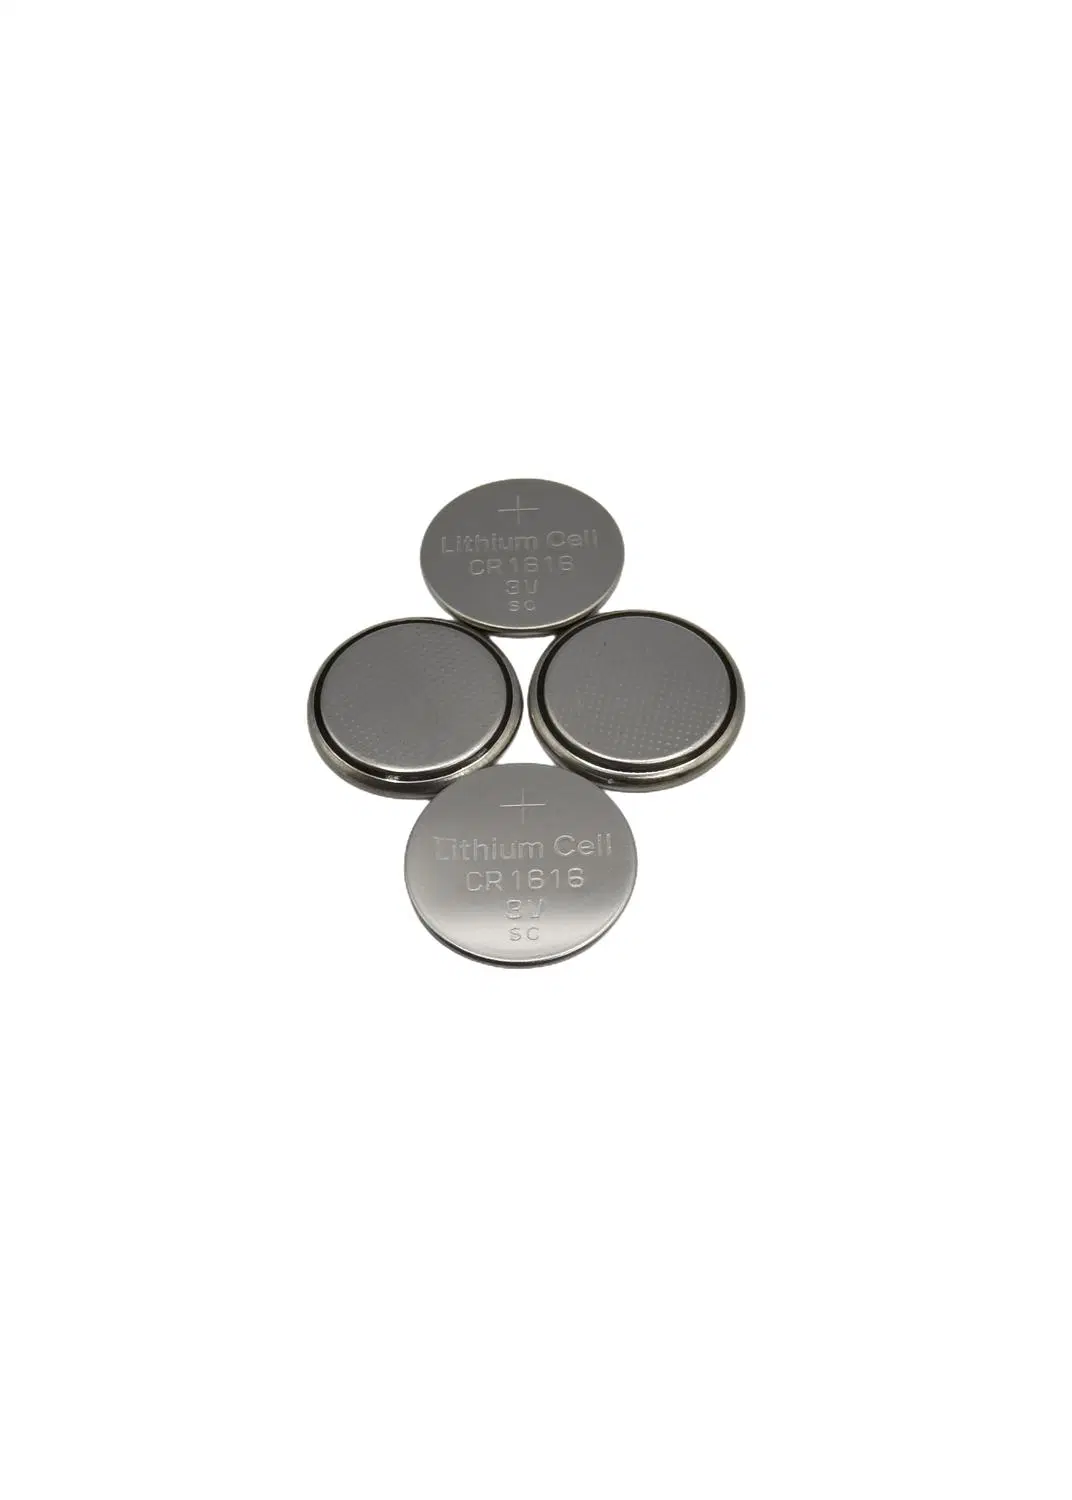 Cbbcell Cr1616 Lithium Button Battery for Watch Toy